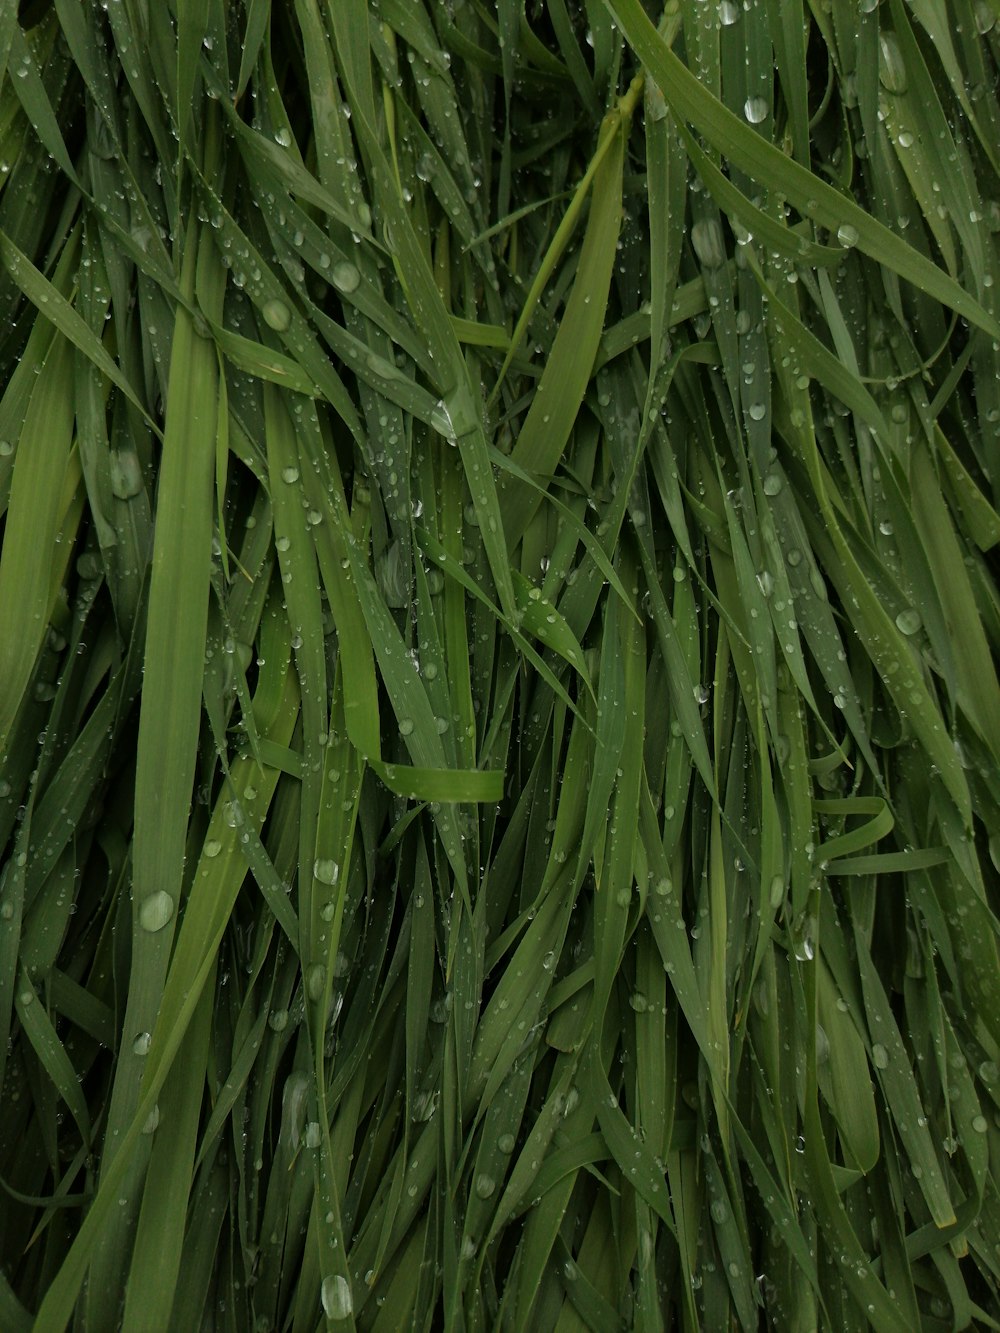 a bunch of grass with water droplets on it